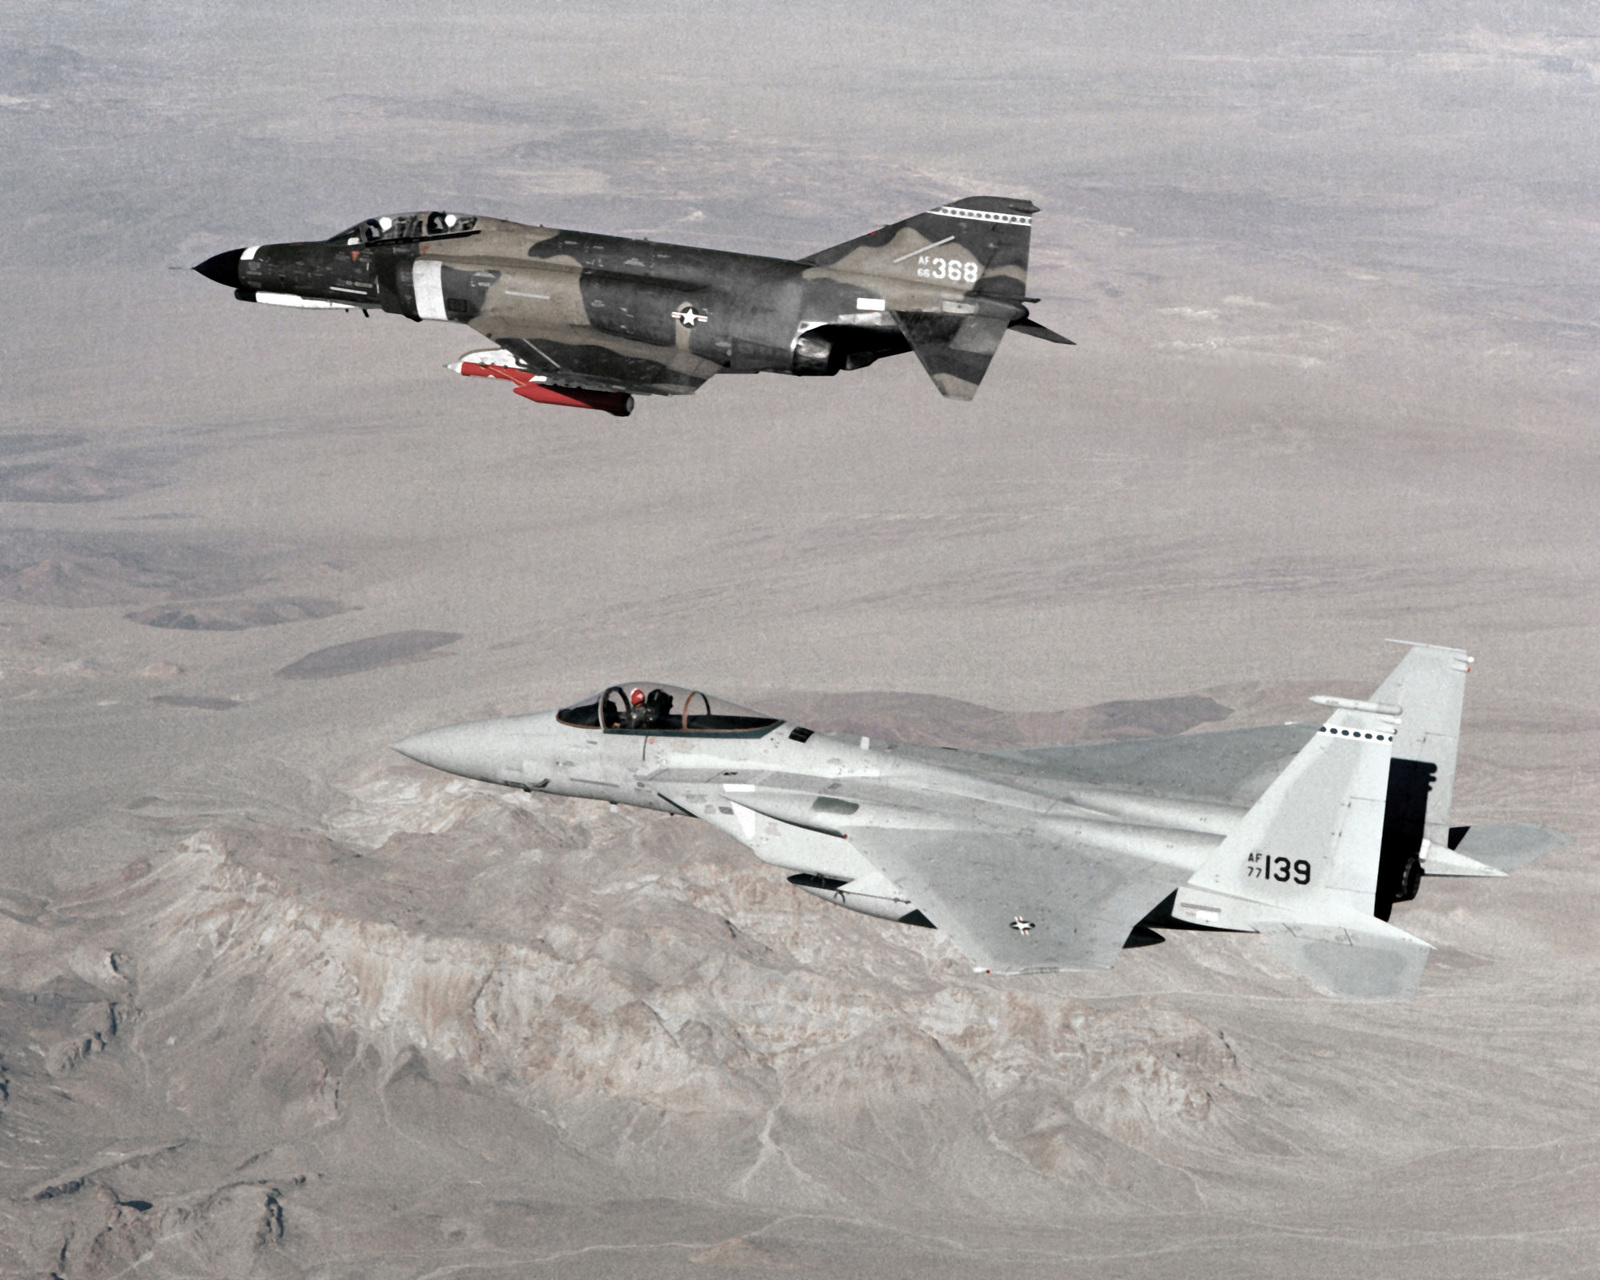 An air-to-air left side view of an F-4 Phantom II aircraft in formation with an F-15 Eagle aircraft.  The F-4 has a tow target mounted under its left wing.